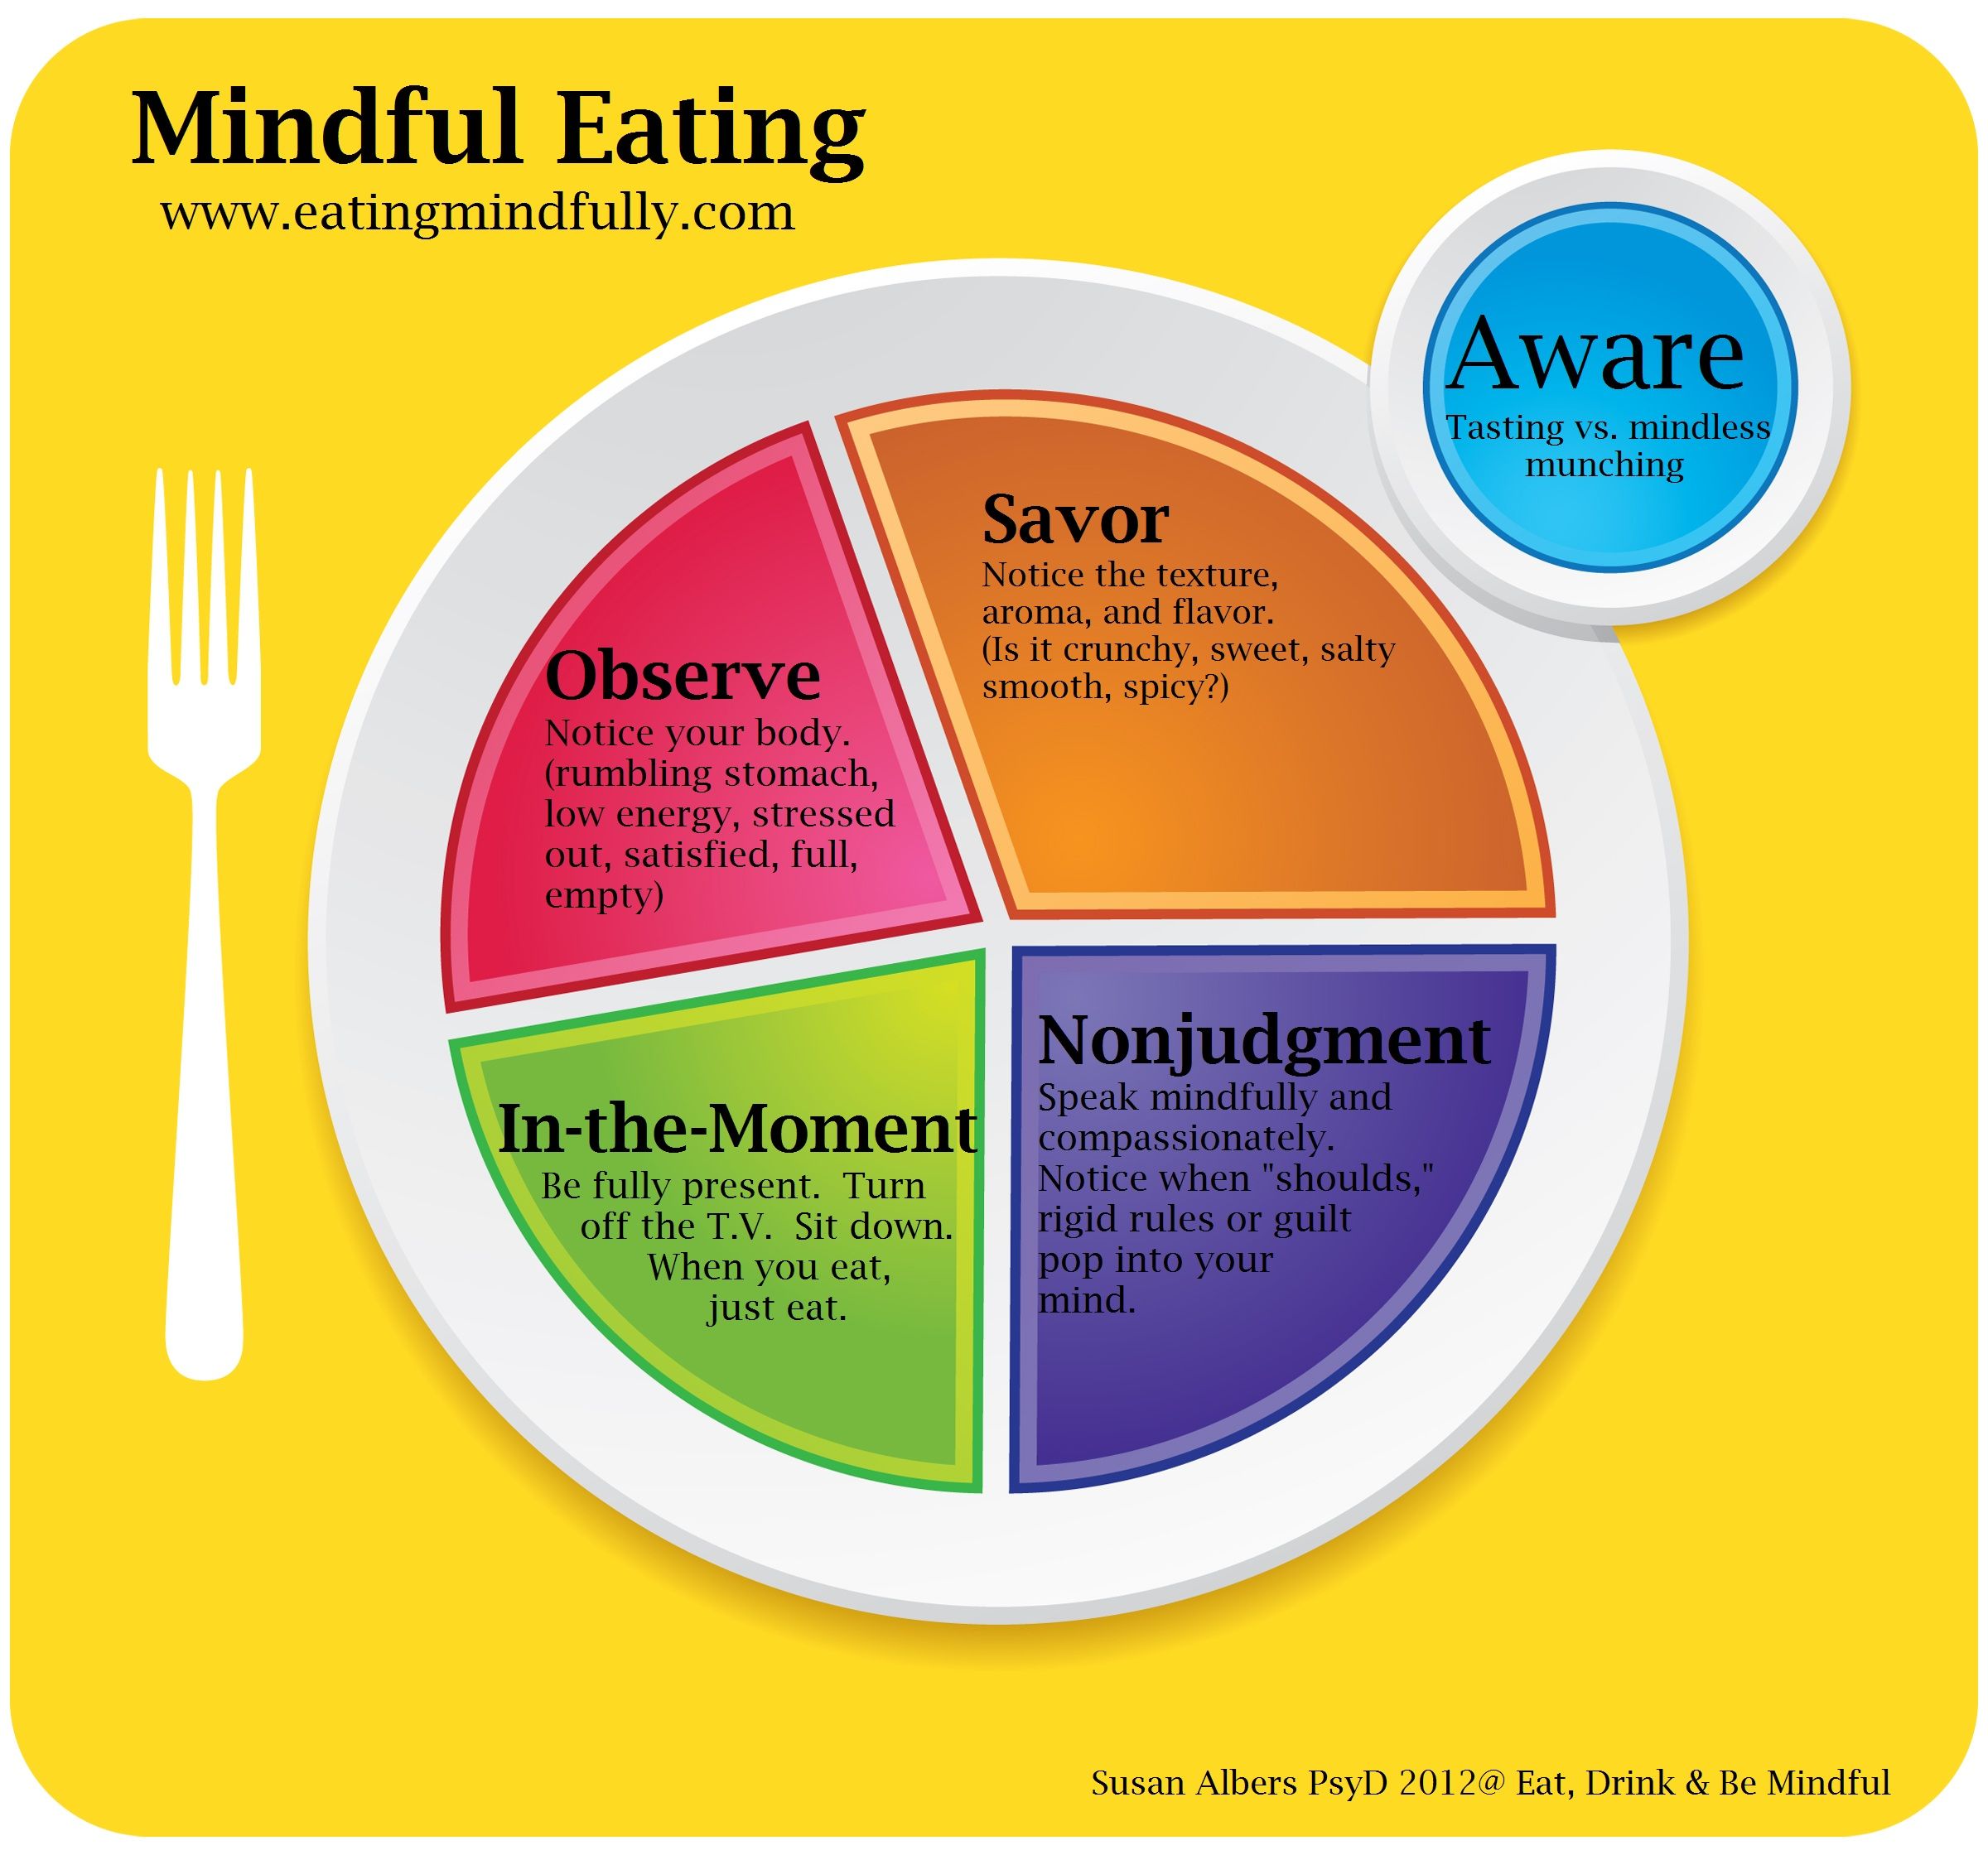 Mindful Eating for Emotional Well-Being